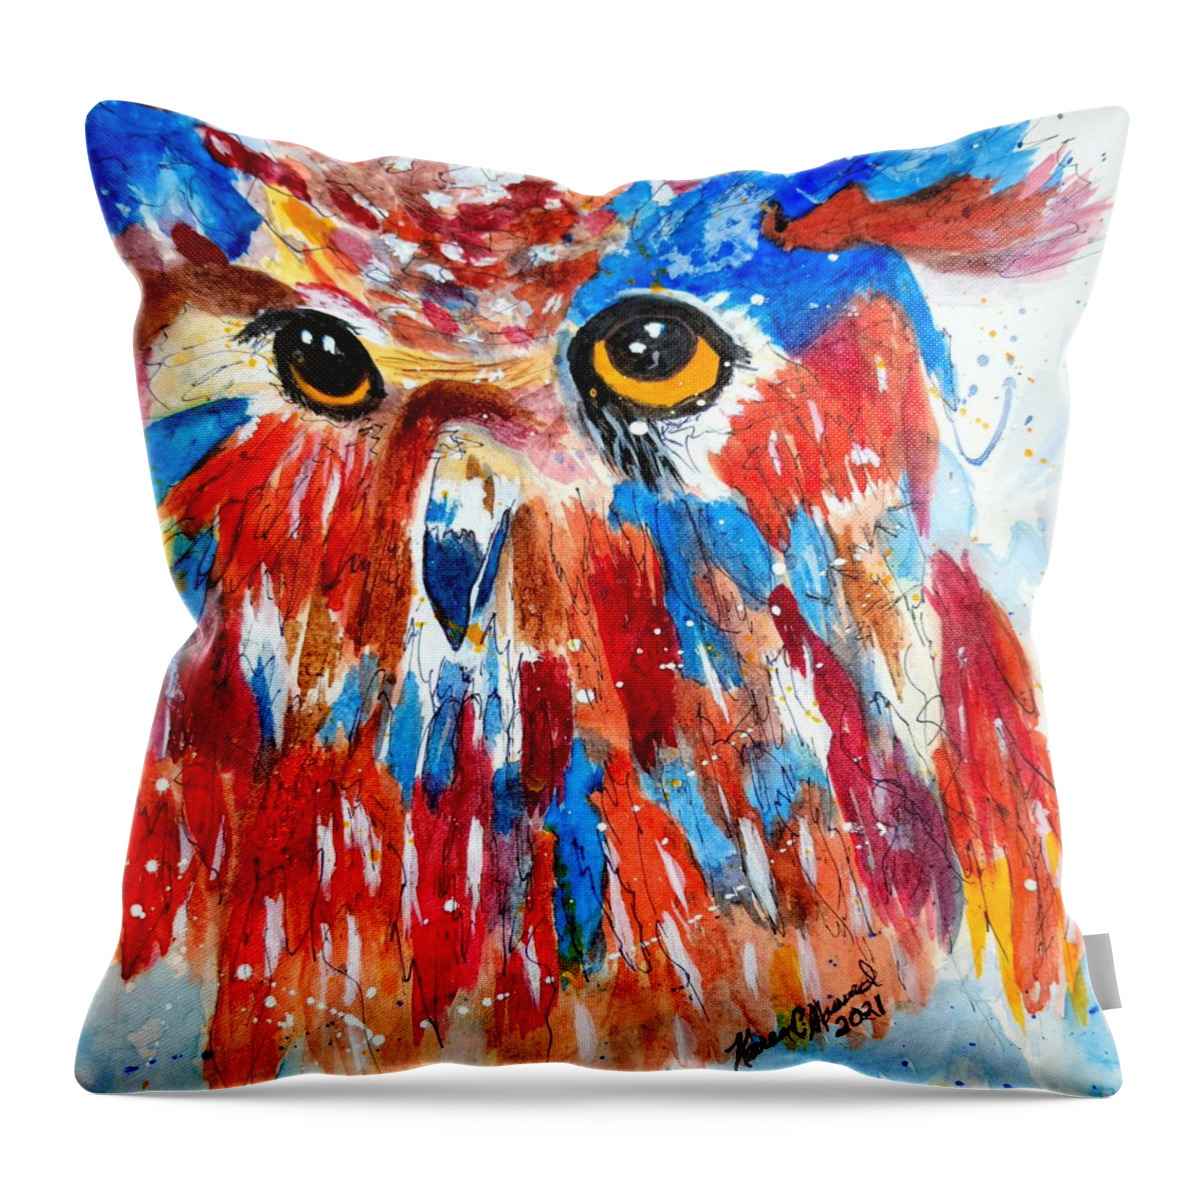 Owl Throw Pillow featuring the painting Sweet Eyed Owl by Shady Lane Studios-Karen Howard